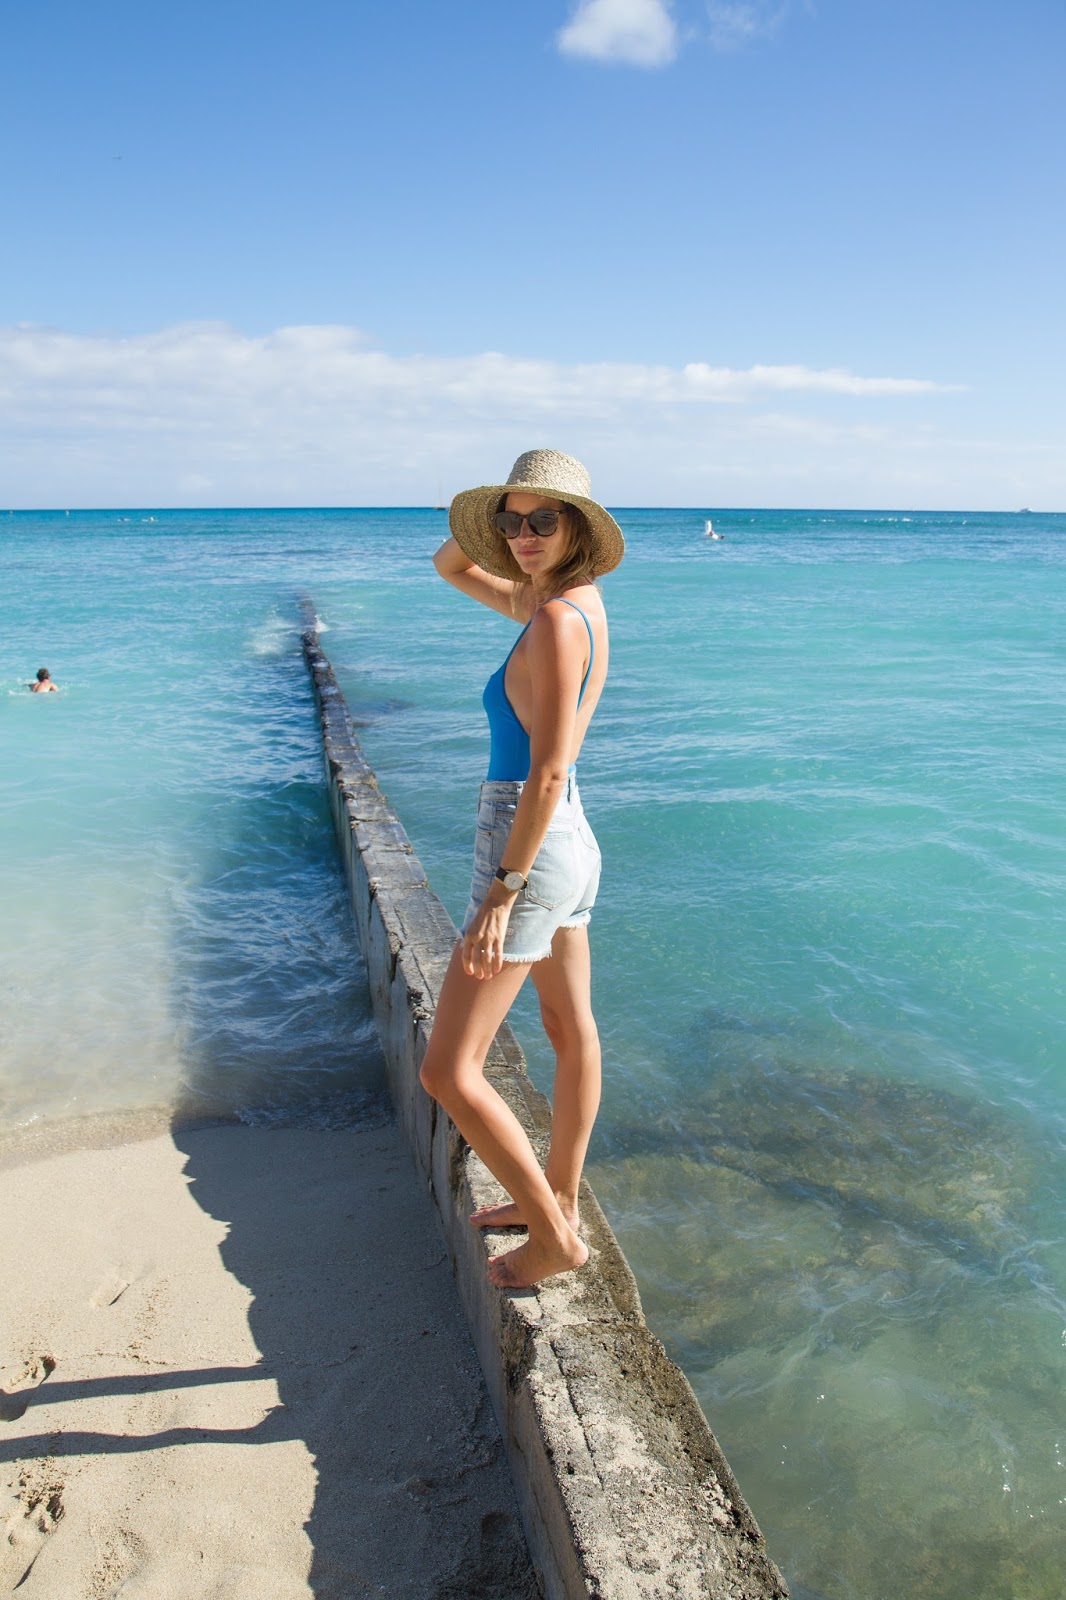 Fashion and travel blogger, Alison Hutchinson, is wearing a Solid and Striped swimsuit, Ksubi shorts, Saint Laurent Sunglasses and a wicker hat from Bali